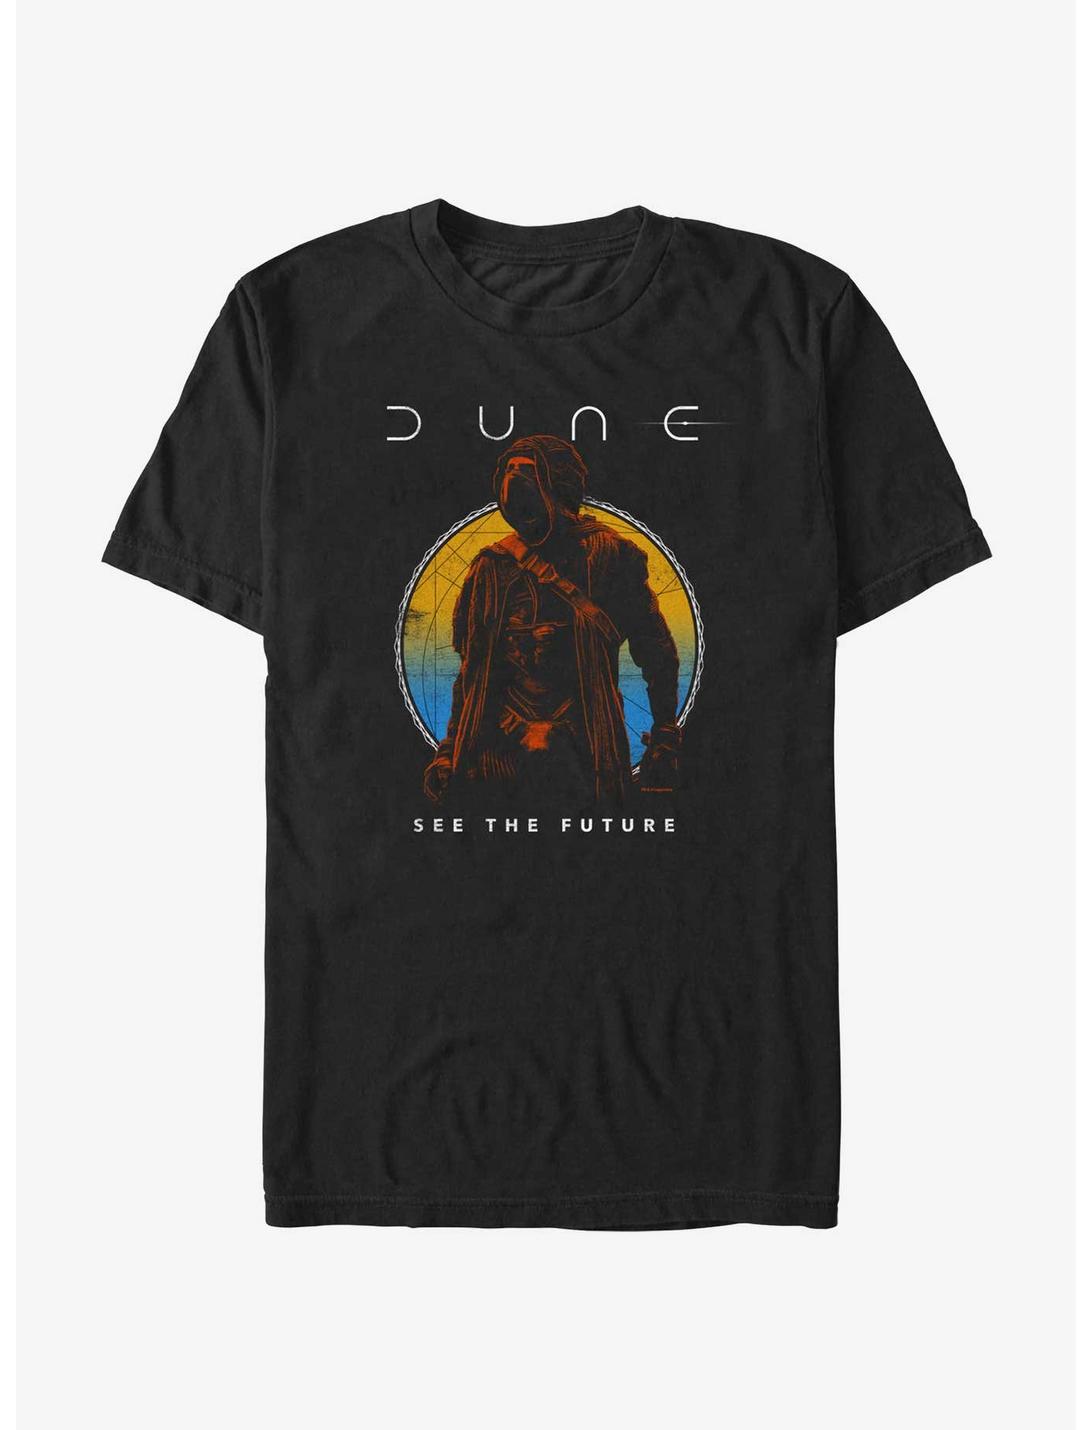 Dune: Part Two See The Future T-Shirt, BLACK, hi-res